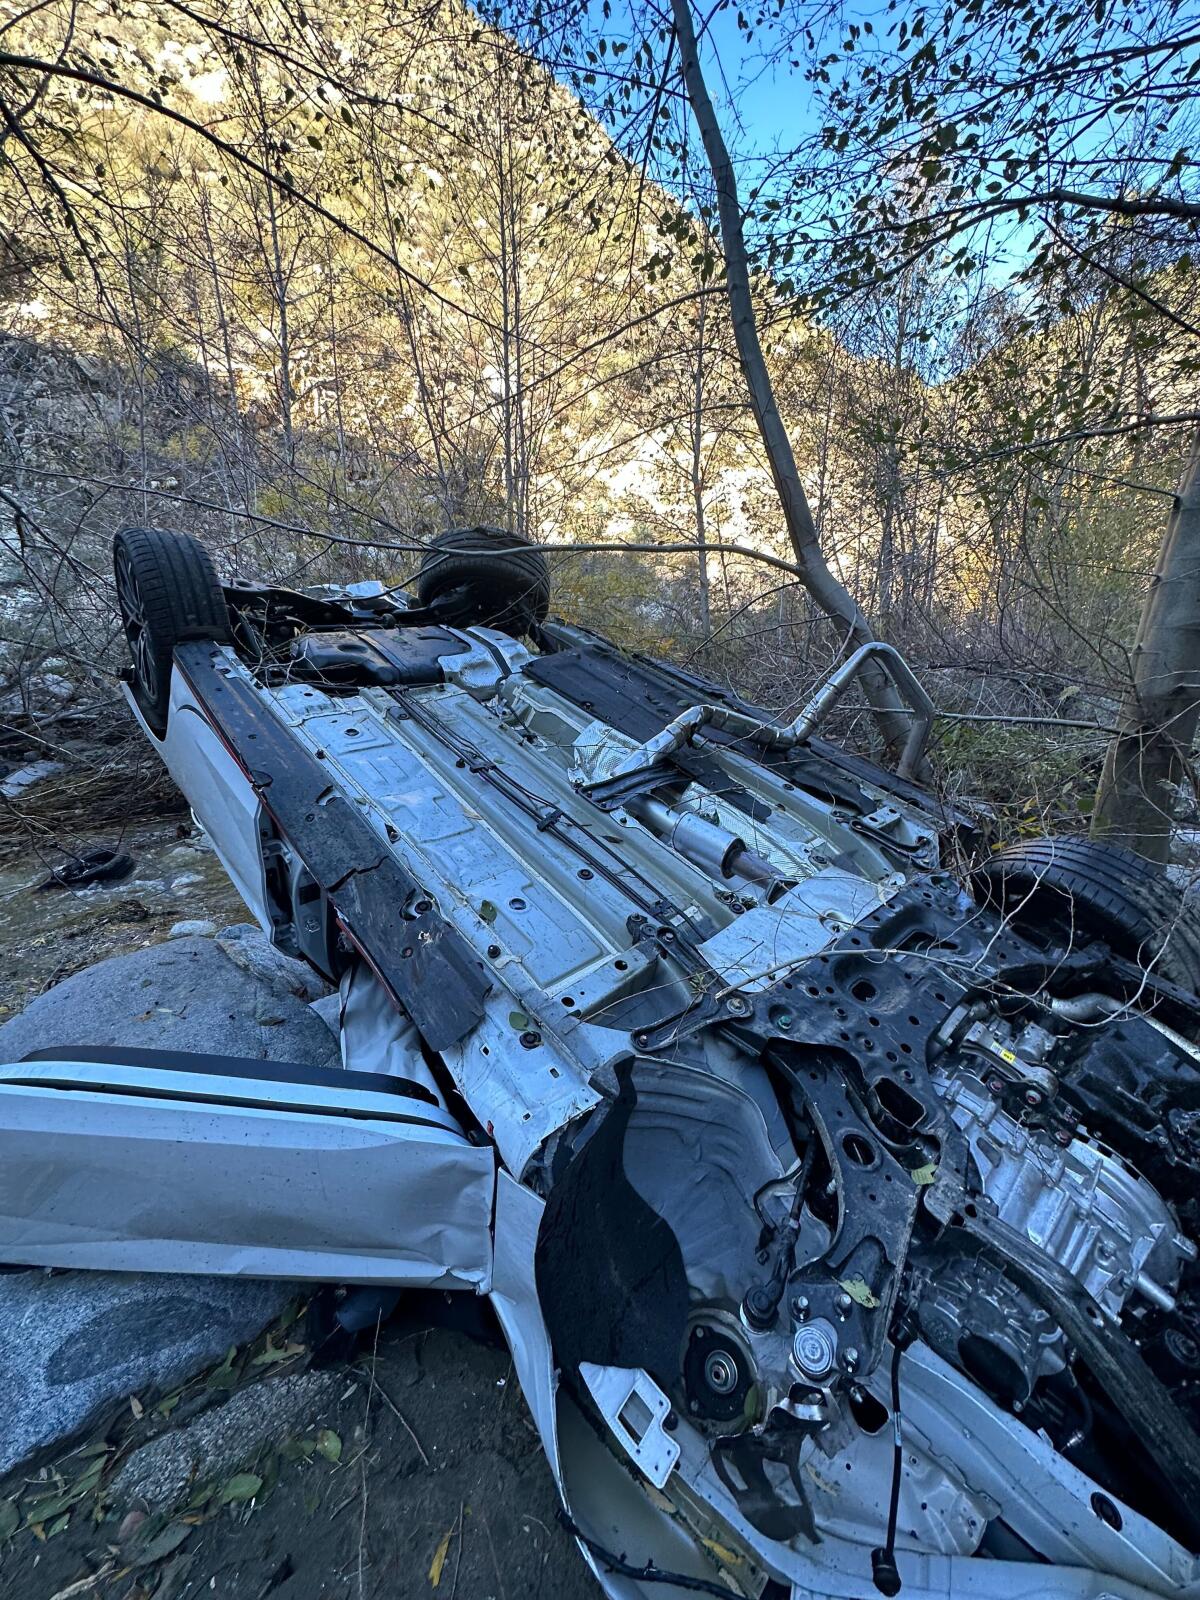 A crashed car upside down amid rocks and brush